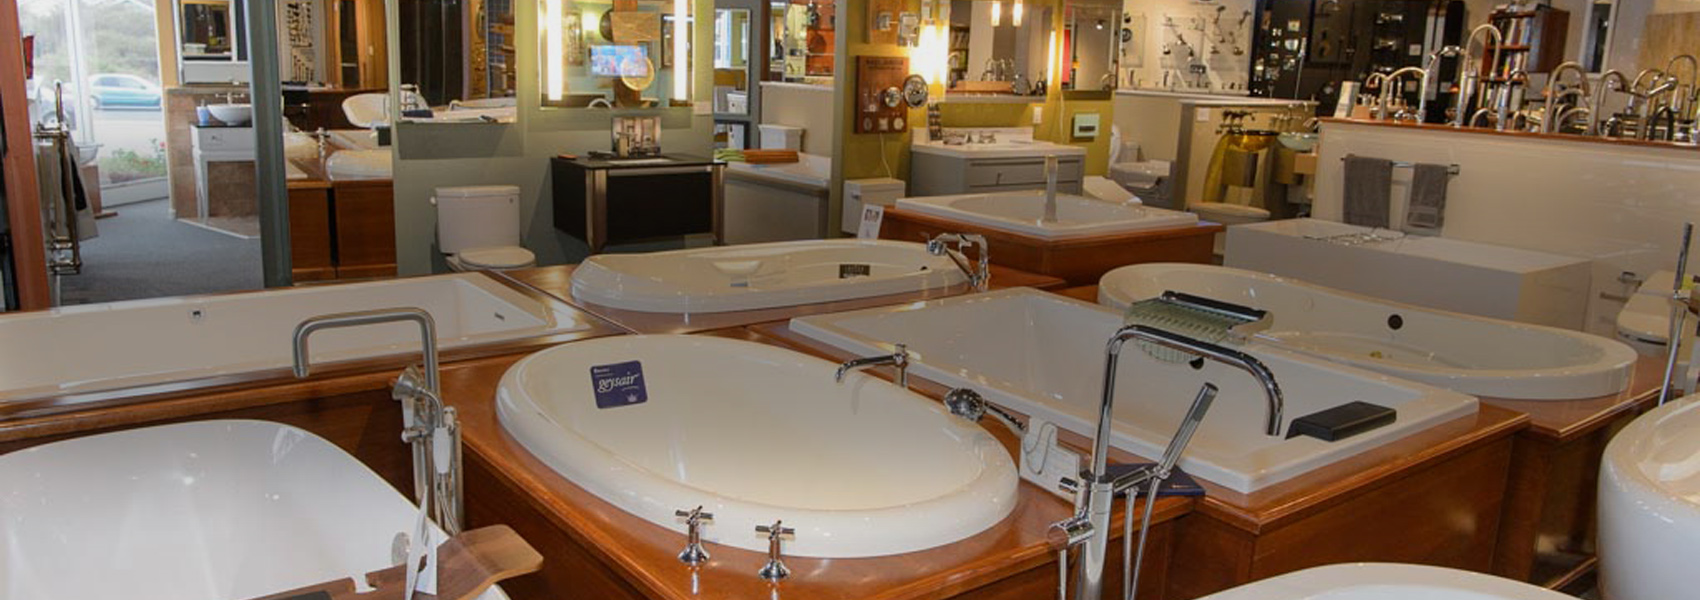 sinks, tubs, faucets